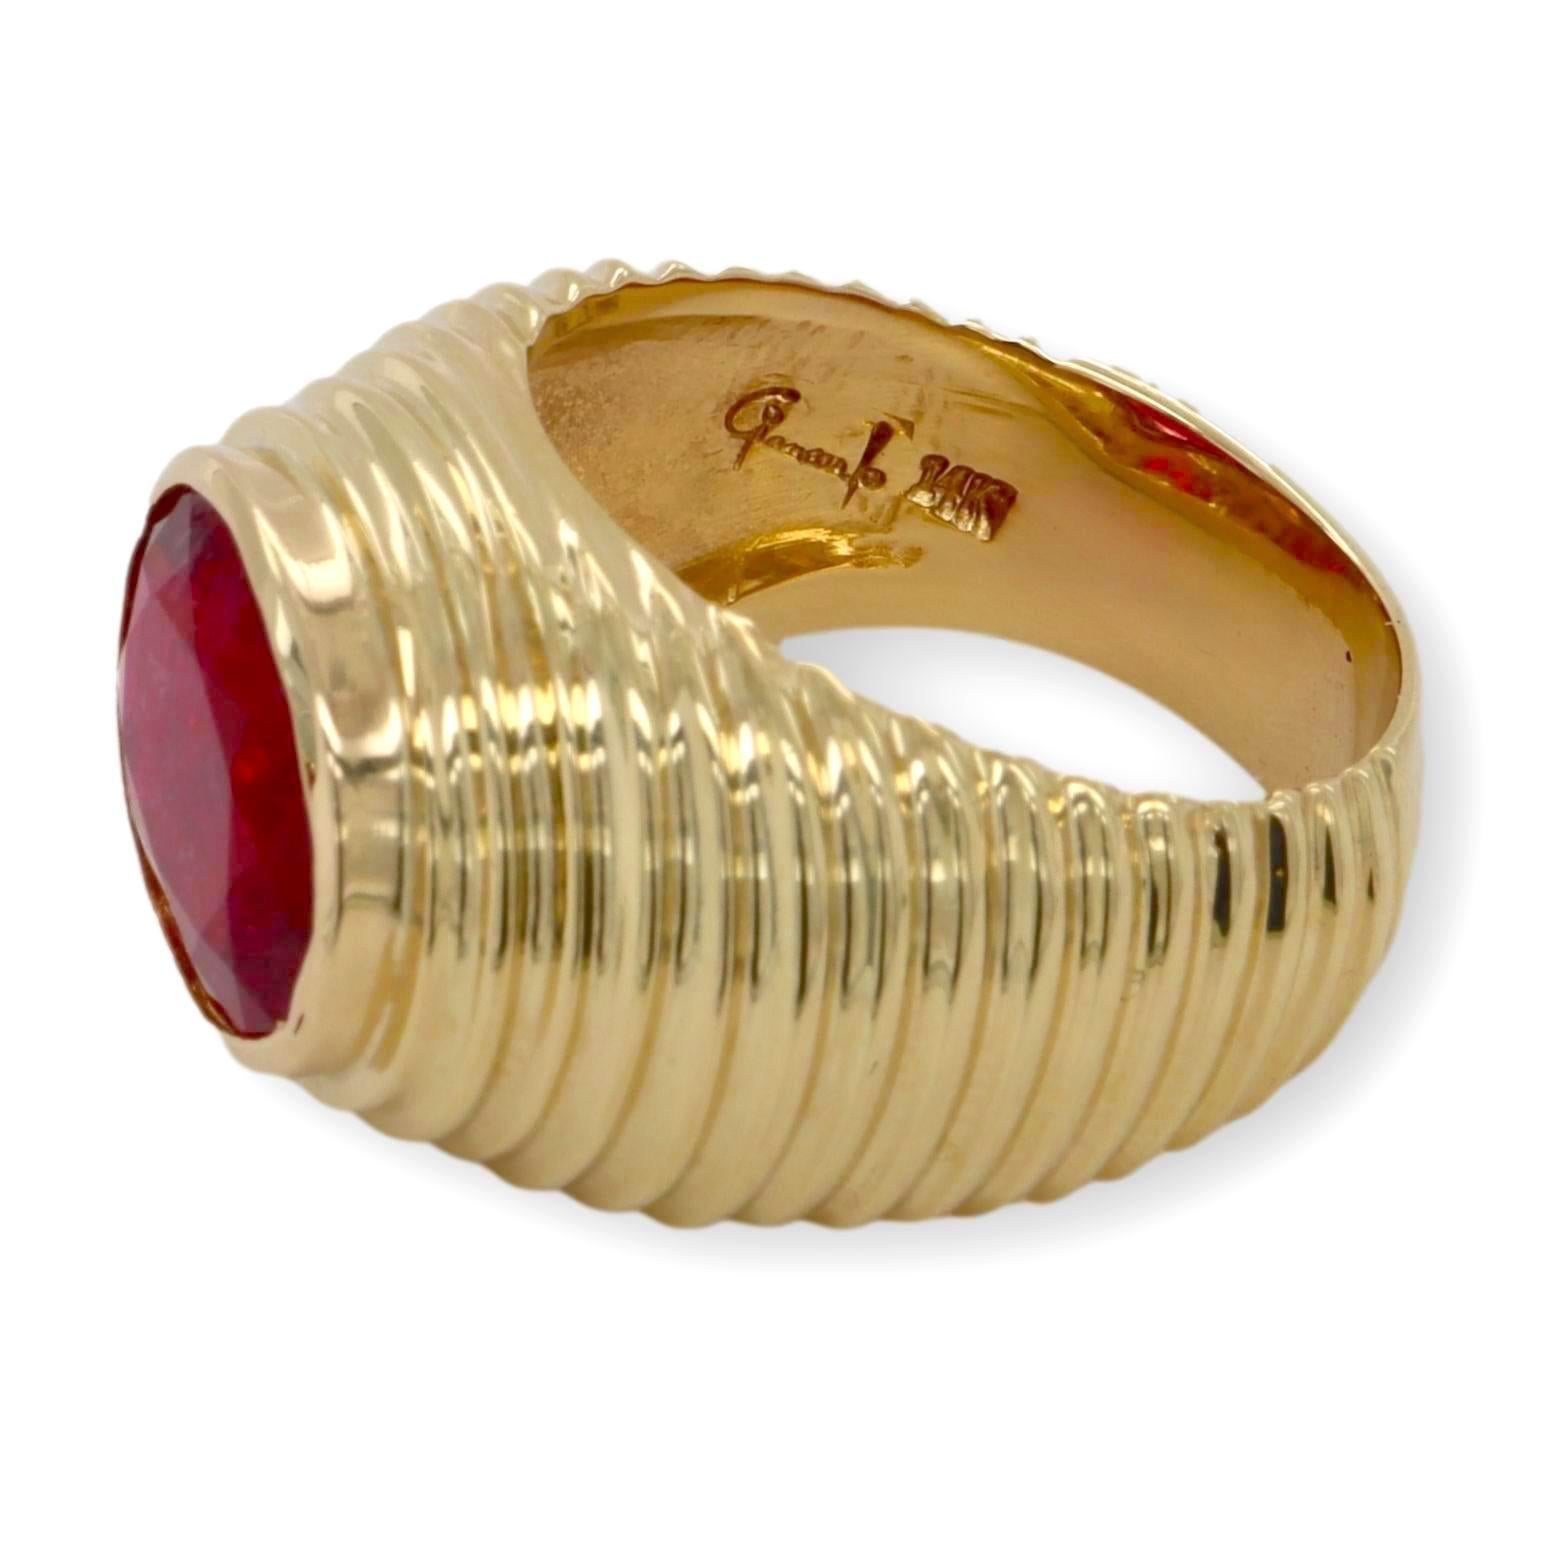 Vintage ring signed by Giancarlo finely crafted in 14 karat yellow gold featuring an oval tourmaline center weighing 3.50 carats approximately in a rich deep pink color set in a bezel design with a ridge design shank. 13mm wide at from to 7mm wide